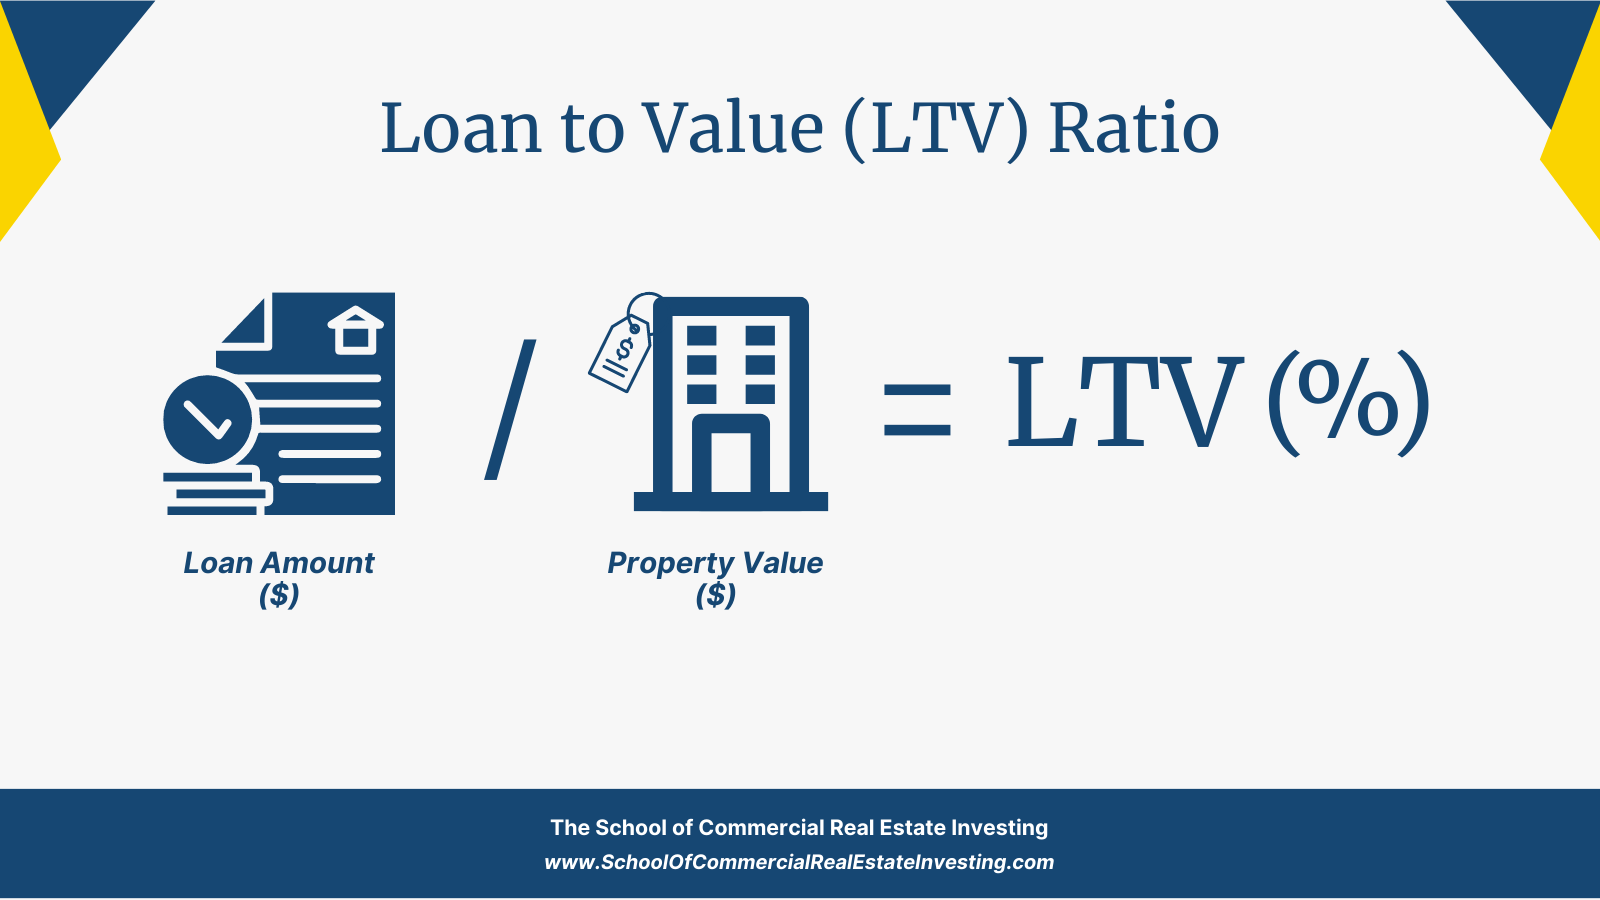 Calculate Loan to Value (LTV) by dividing the loan amount by the property value.